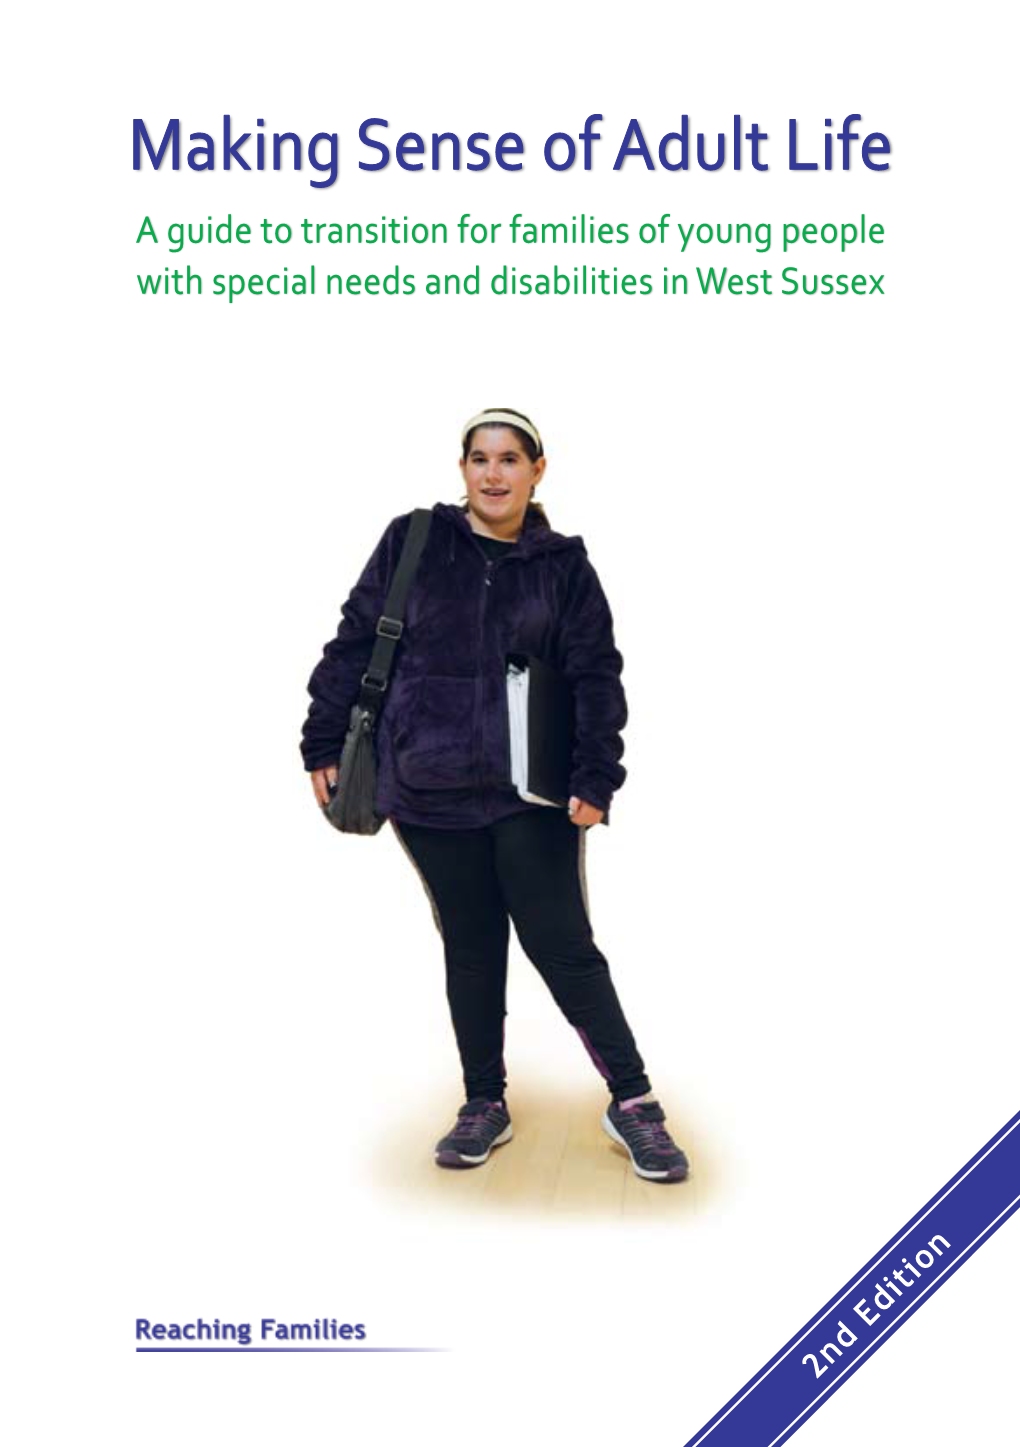 Making Sense of Adult Life a Guide to Transition for Families of Young People with Special Needs and Disabilities in West Sussex